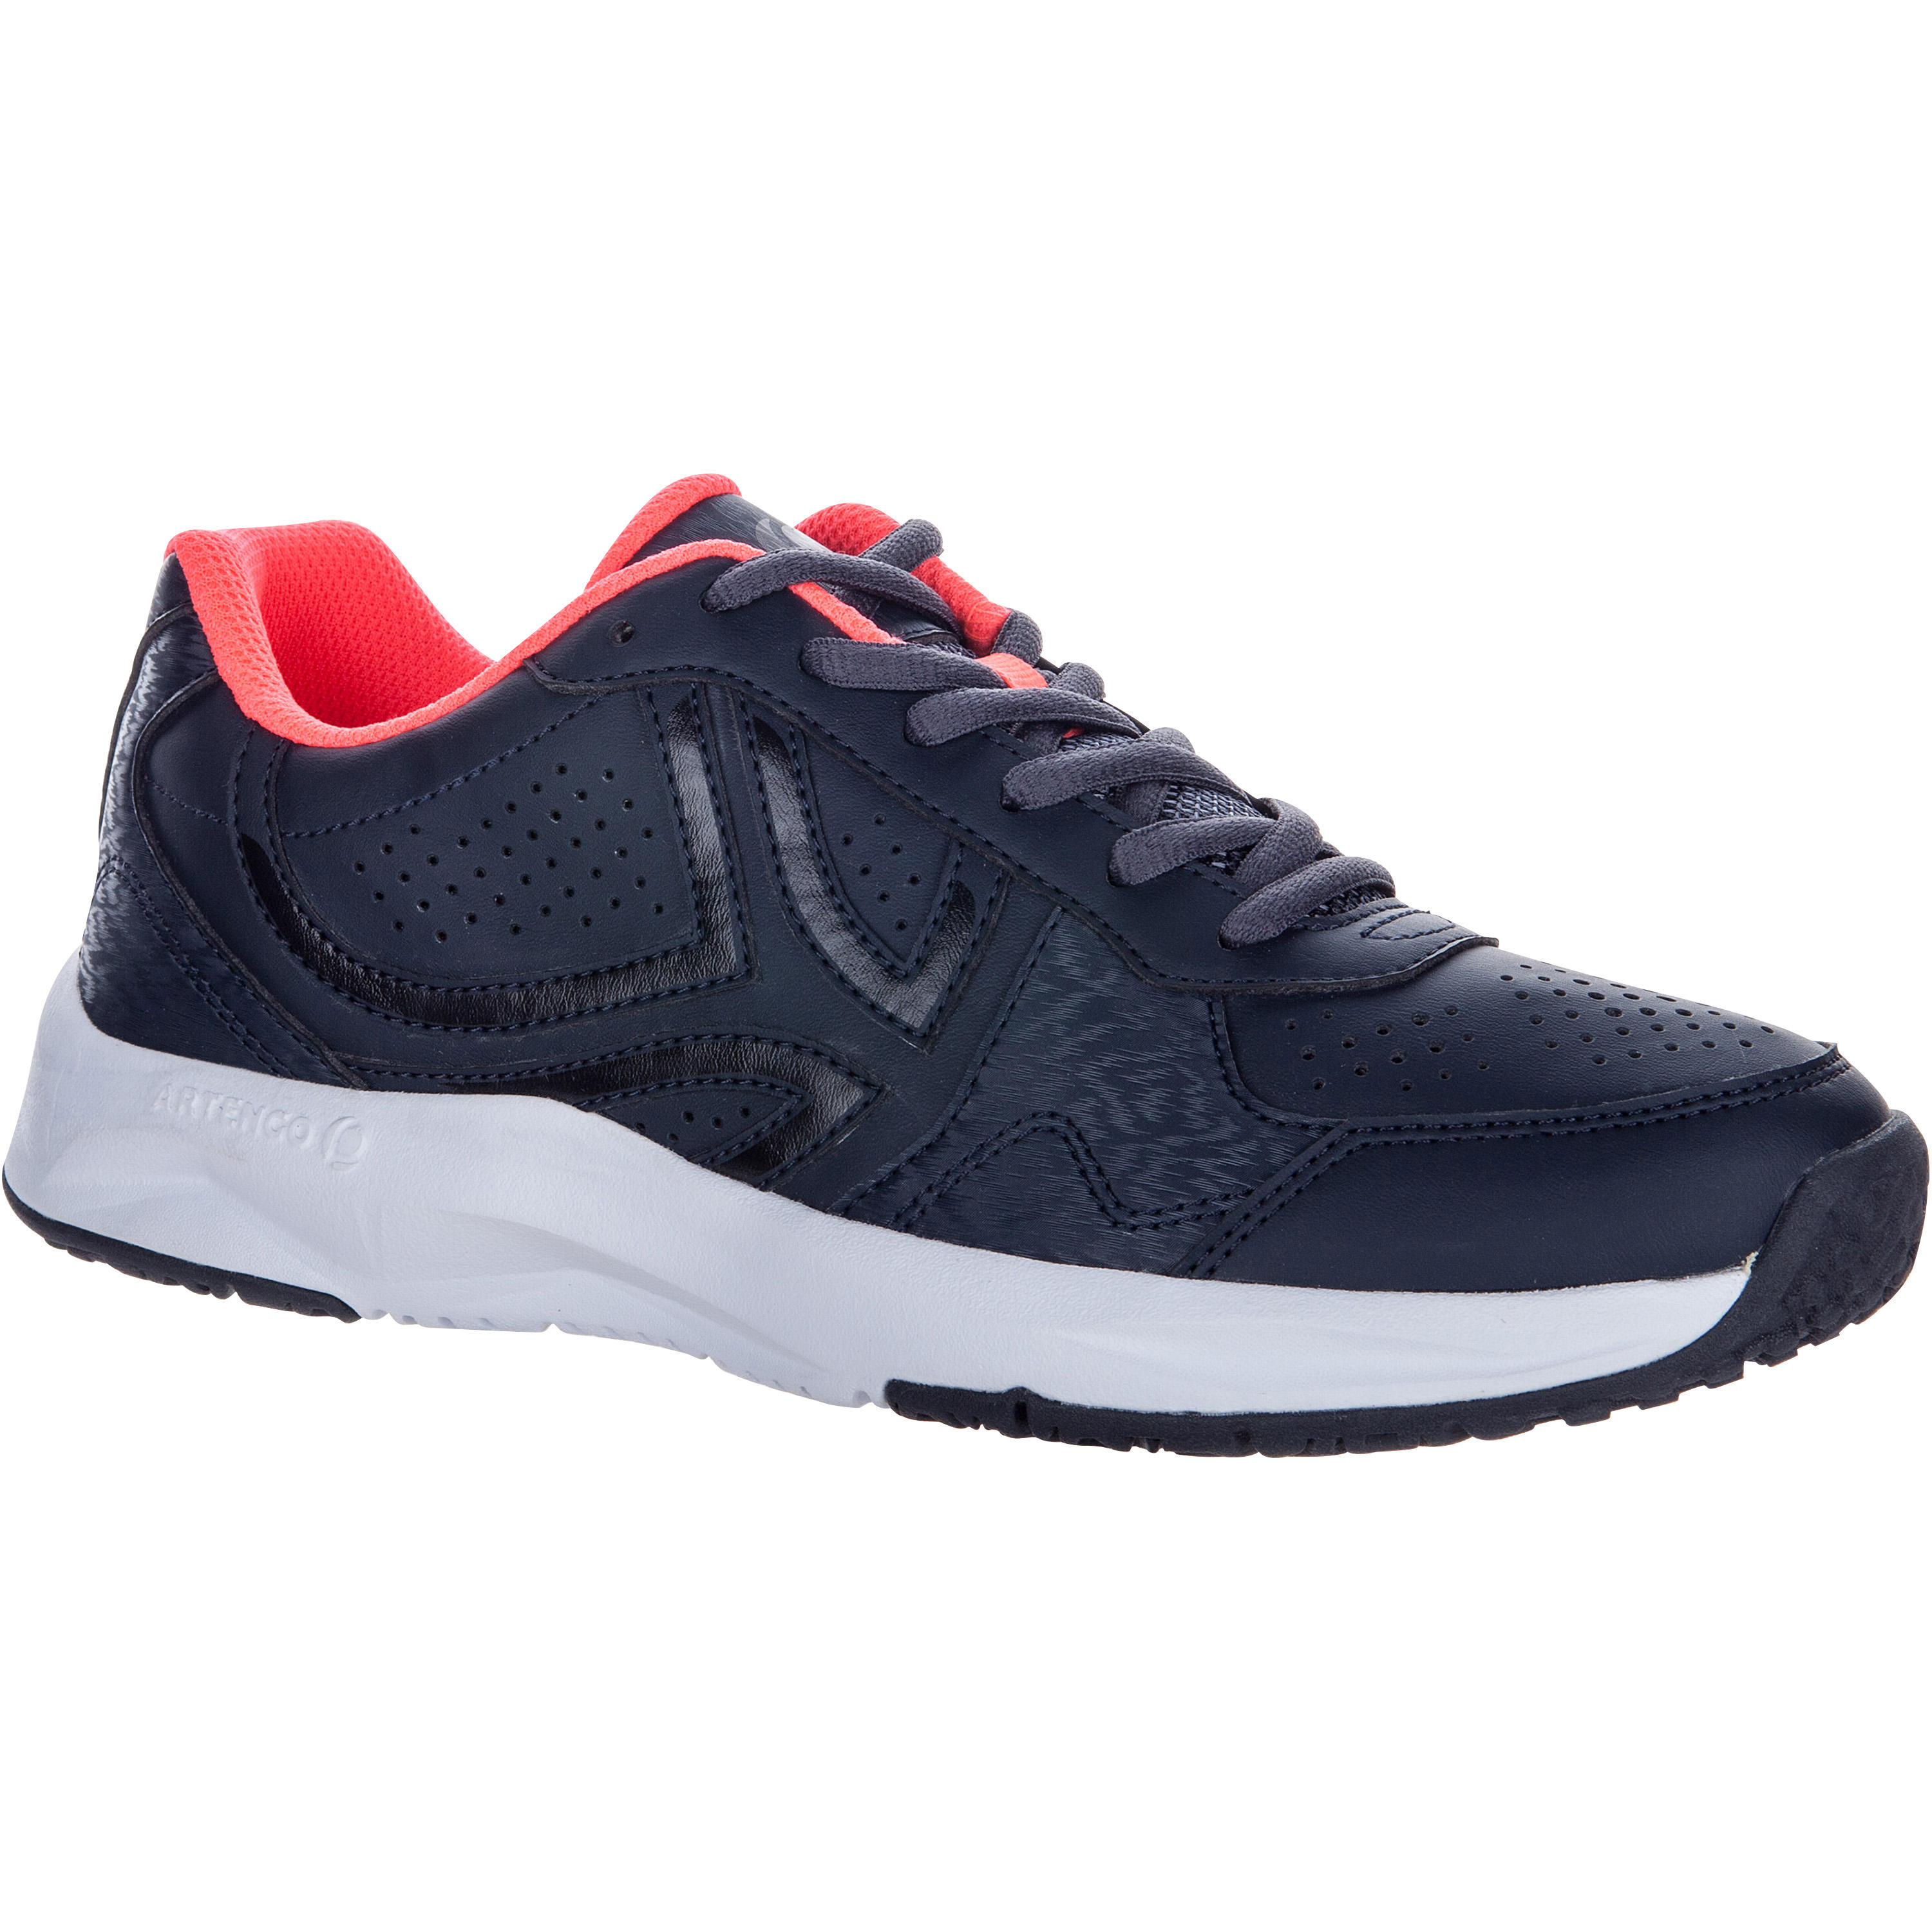 Tennis Shoes Online In India|Ts830 L 